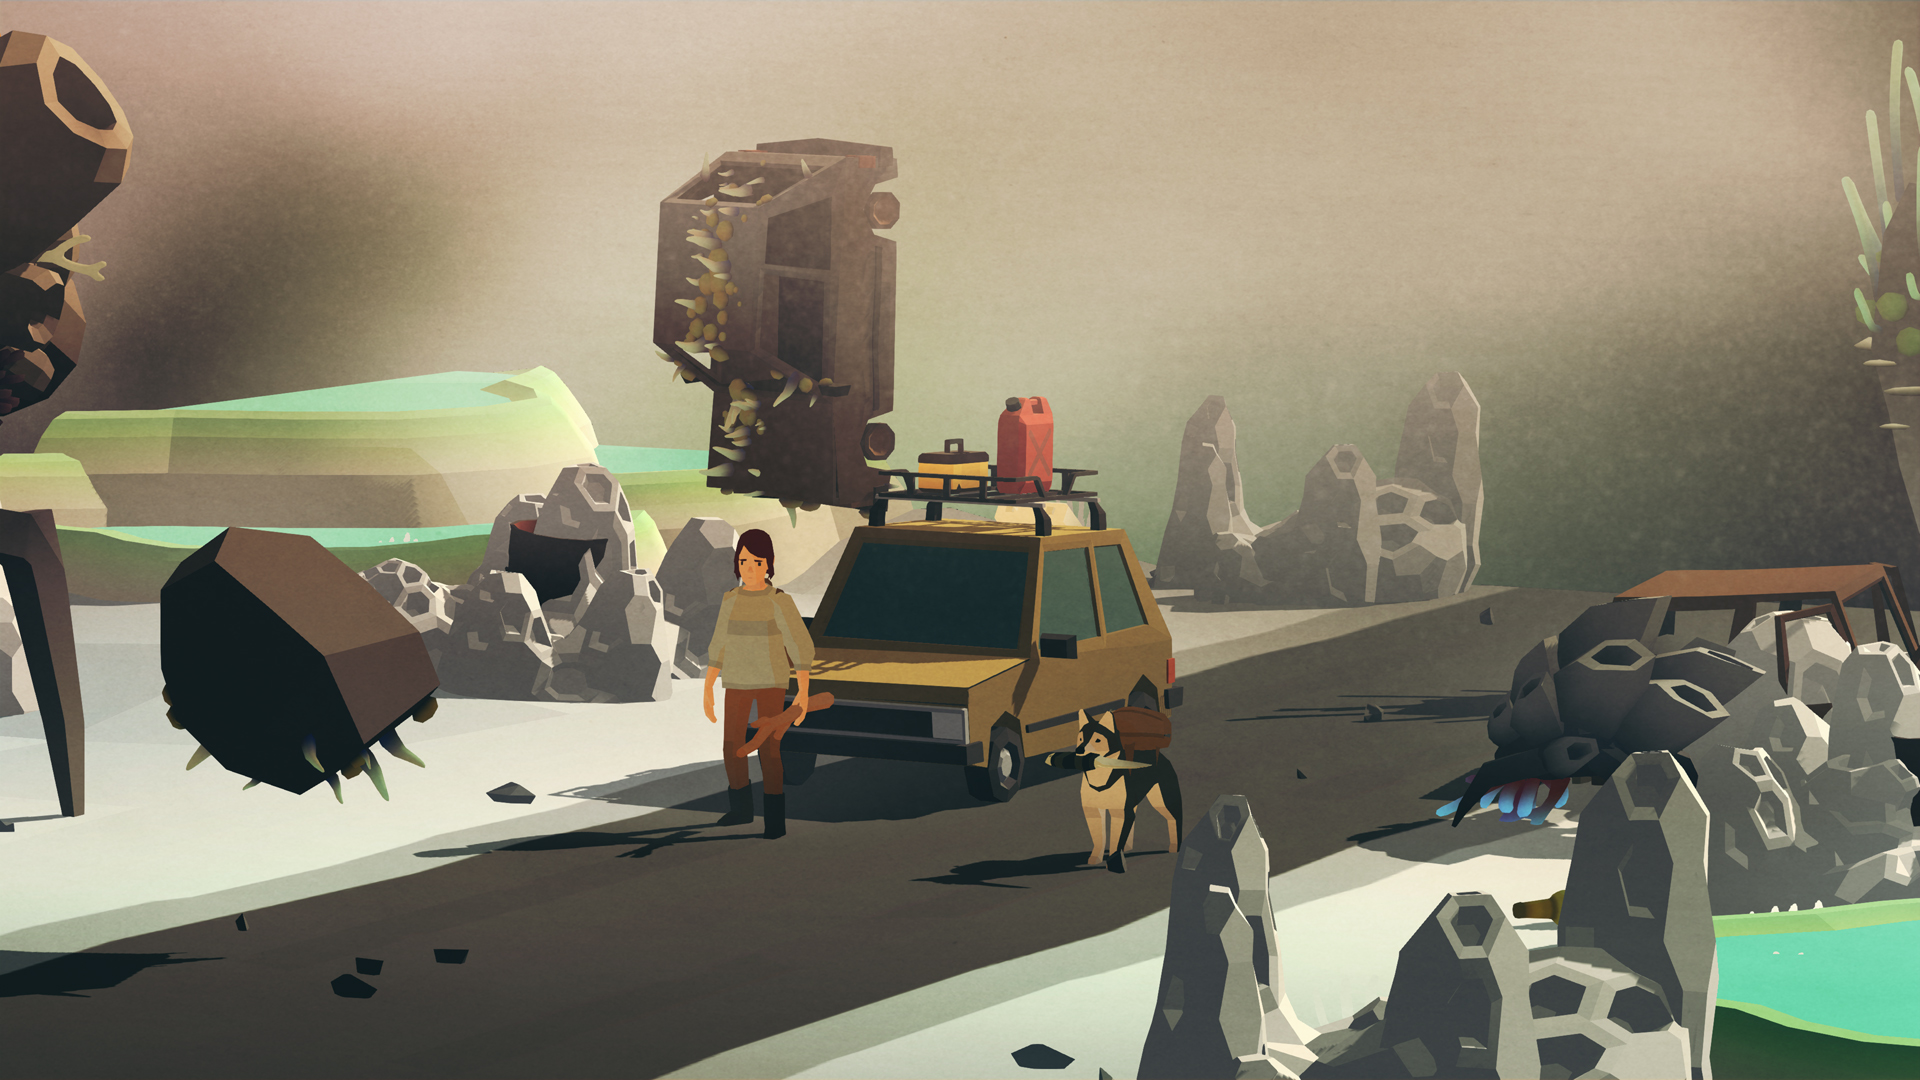 Award-Winning Finji Games Launches Overland Apocalyptic Road Trip Game